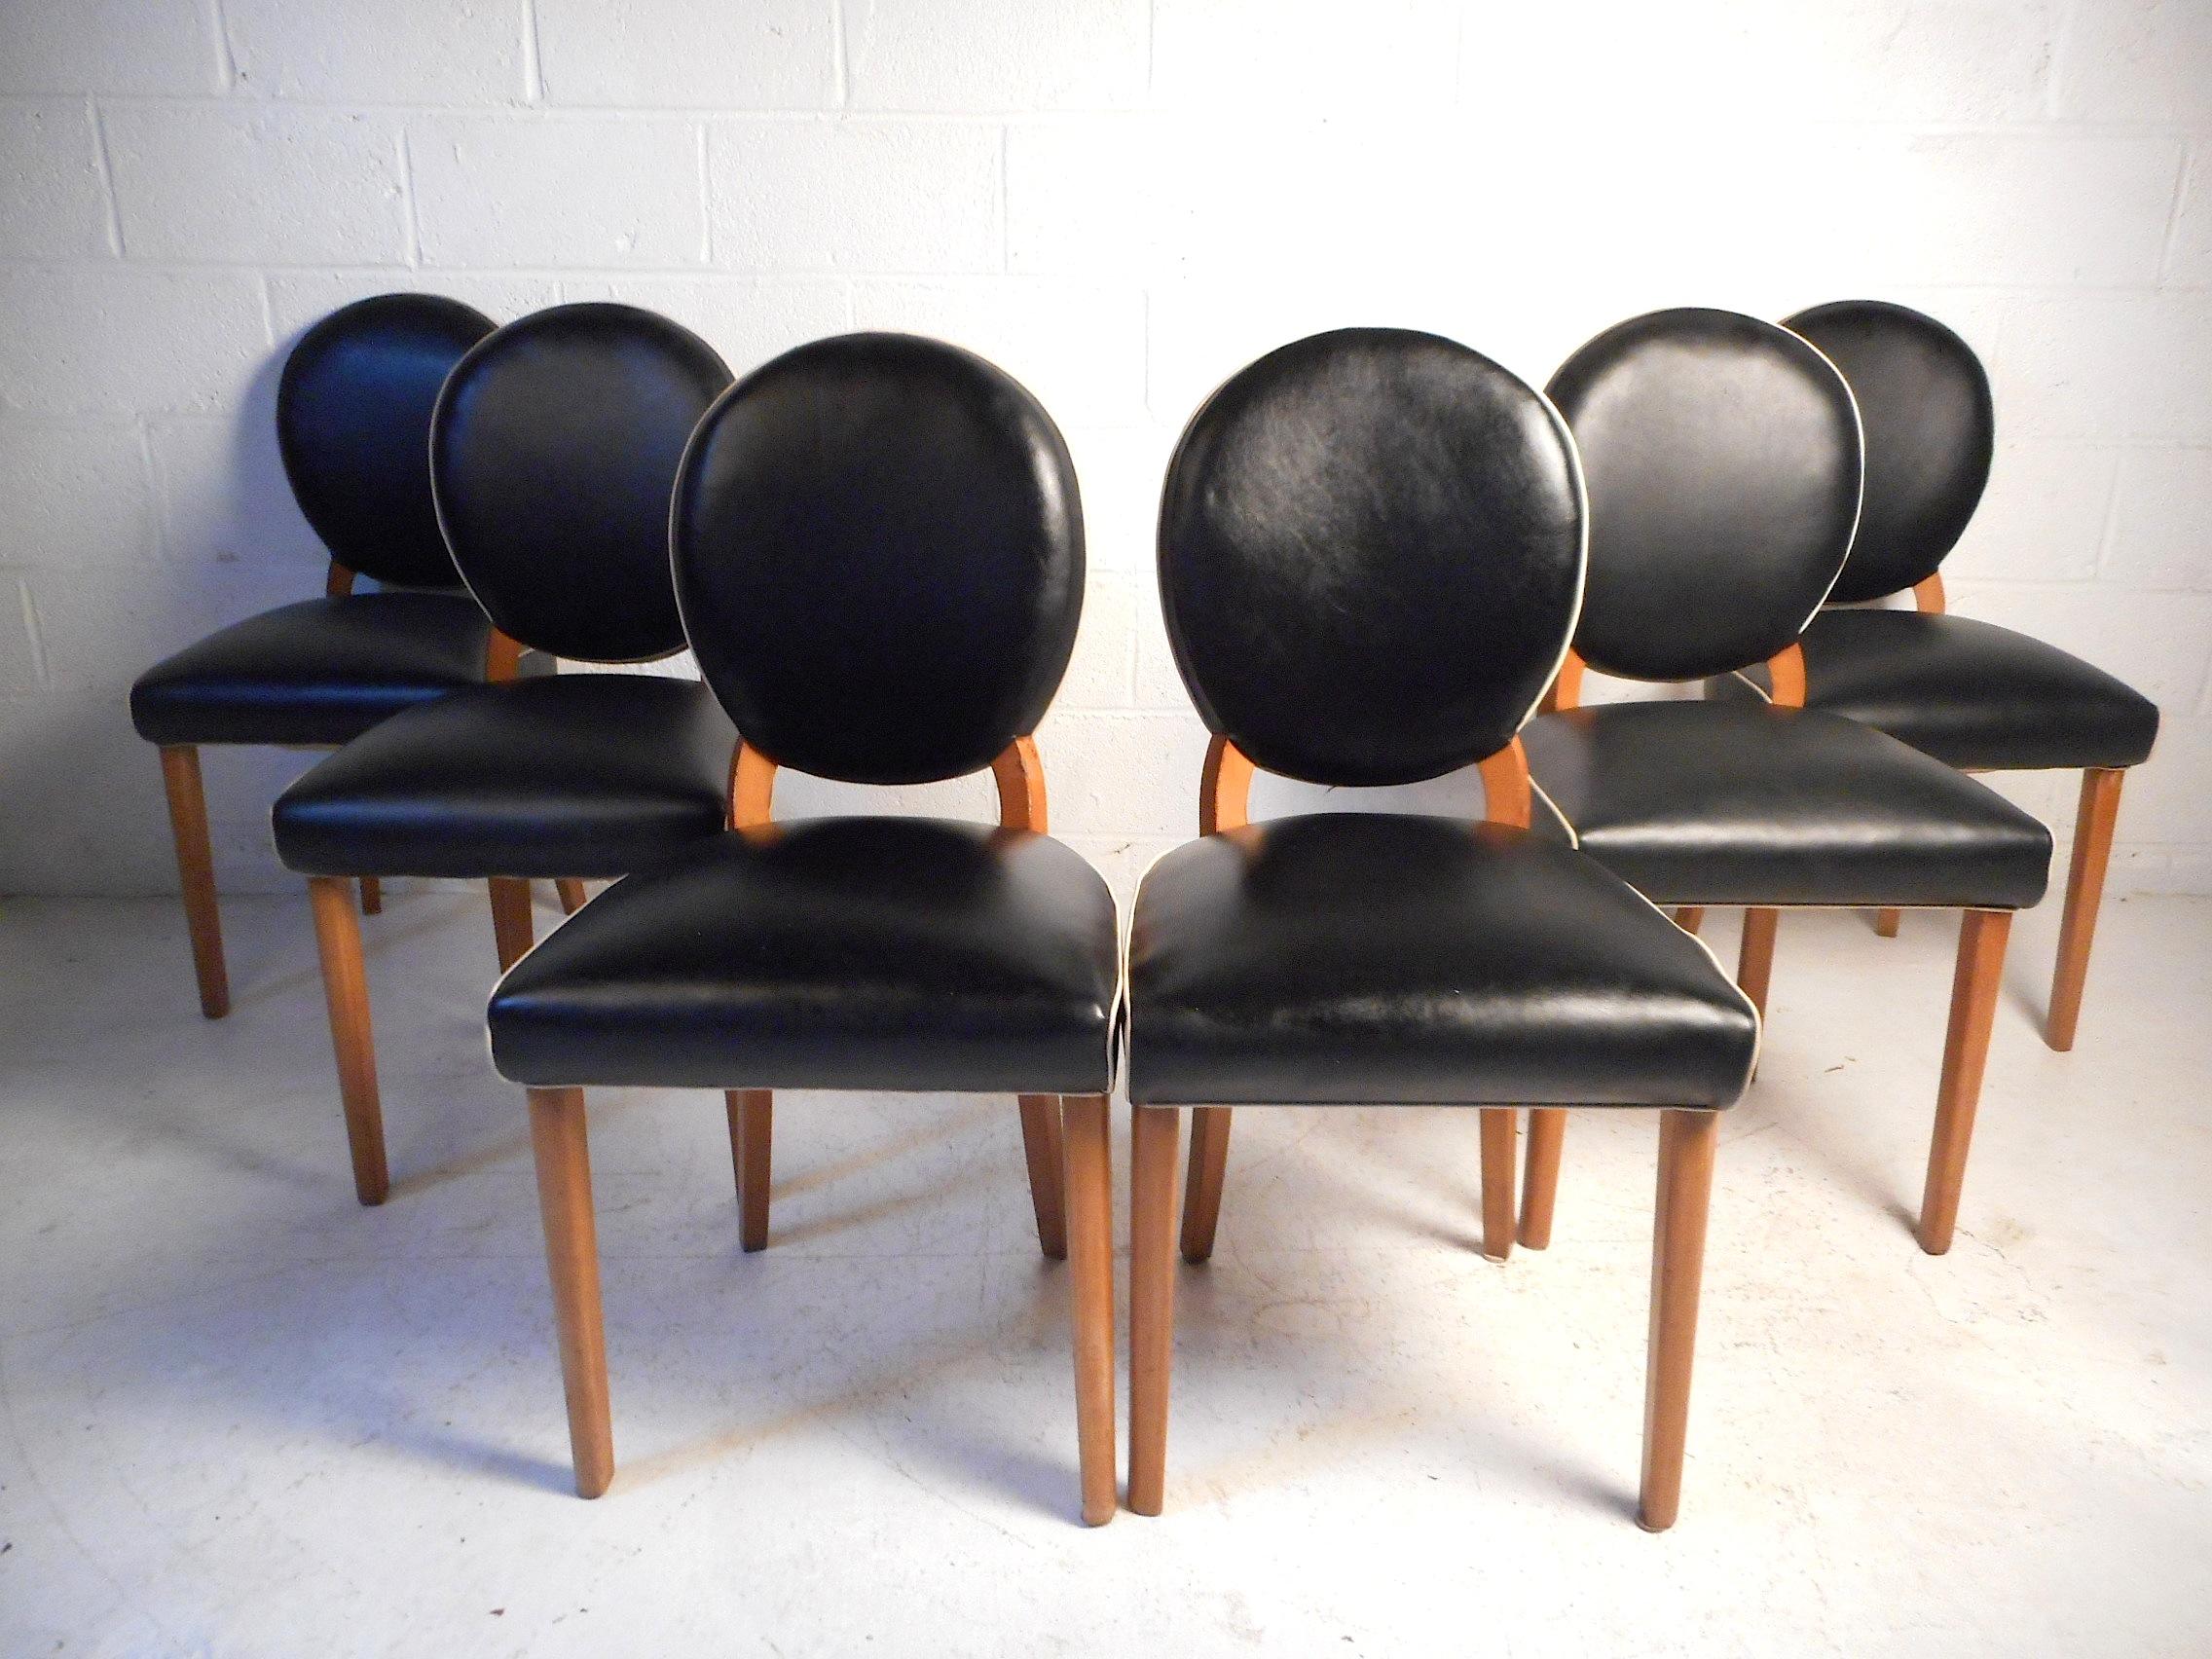 This unique set of dining chairs feature black faux-leather upholstery which is lined with white trim giving the chairs an interesting visual profile. The upholstery is secured by tufts on the backside of the chairs. Sturdy wooden frame supports. A